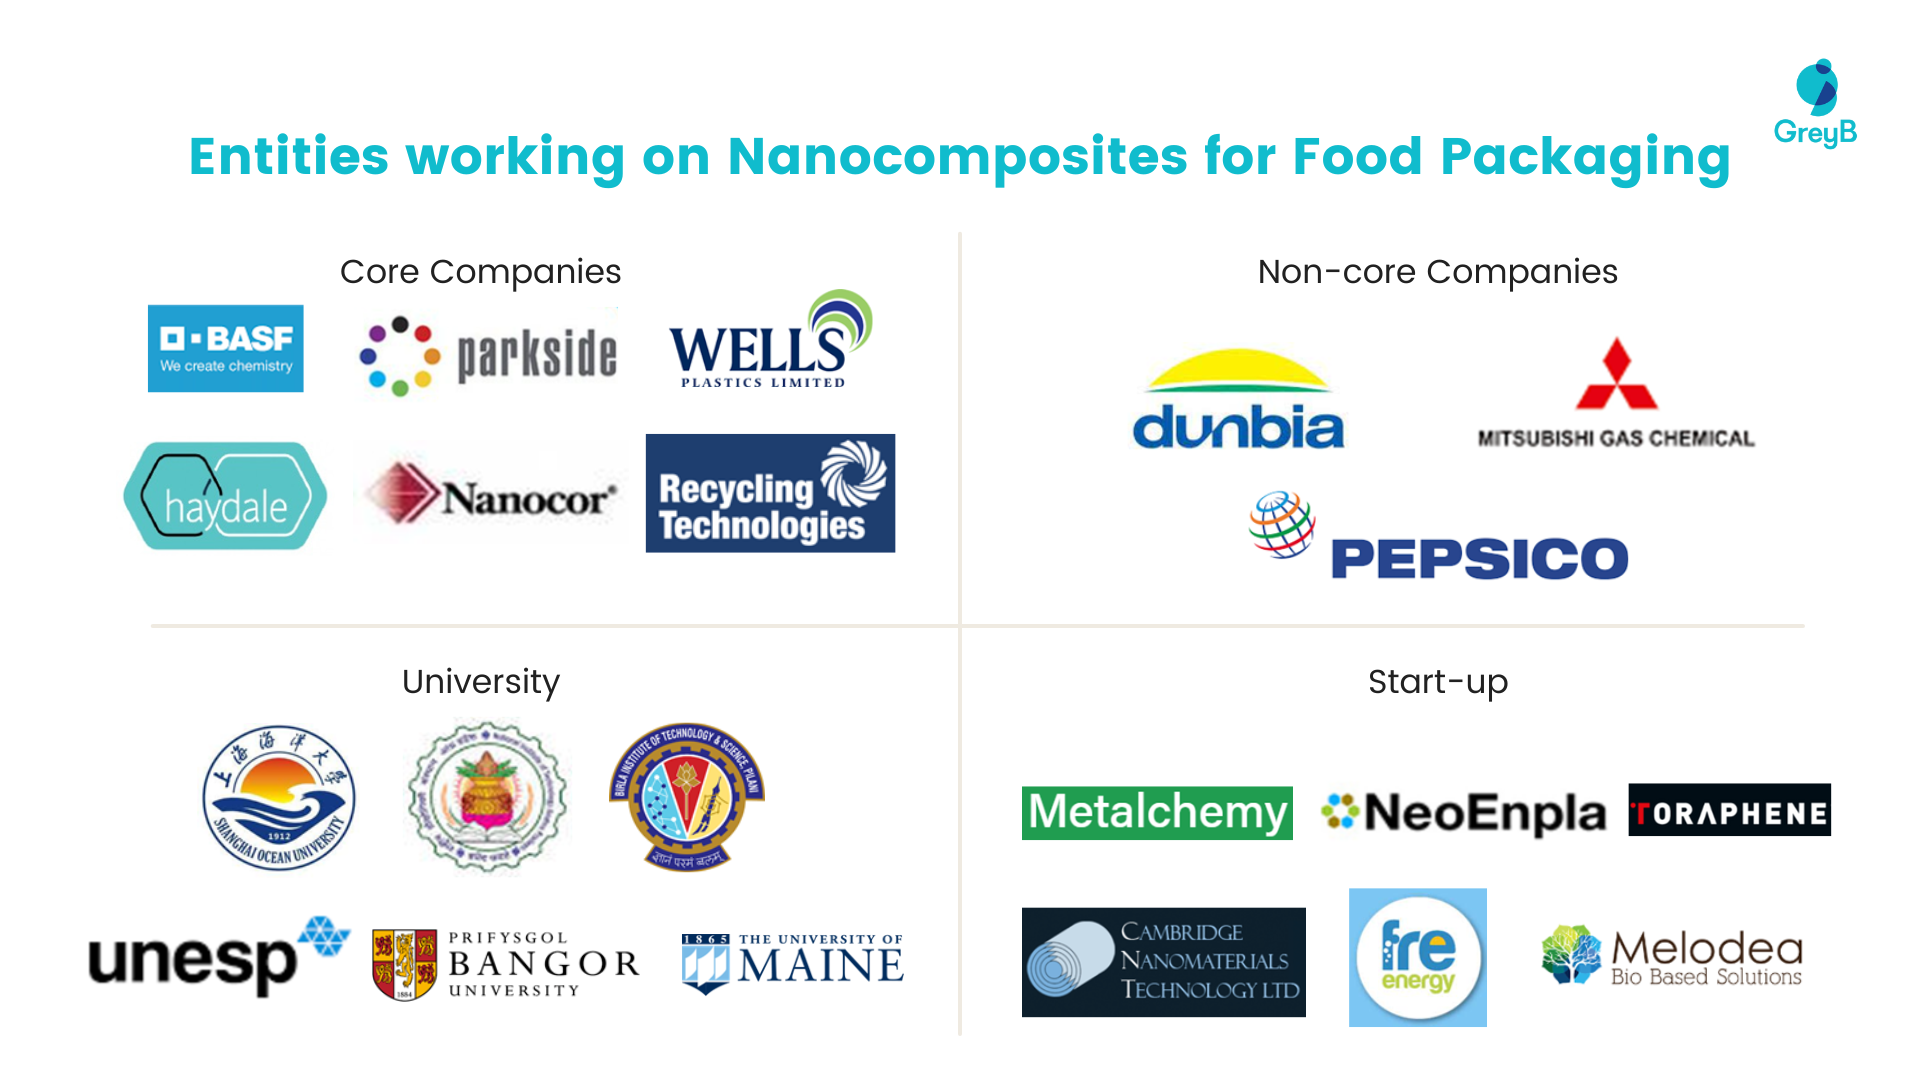 Entities working on Nanocomposites for Food Packaging